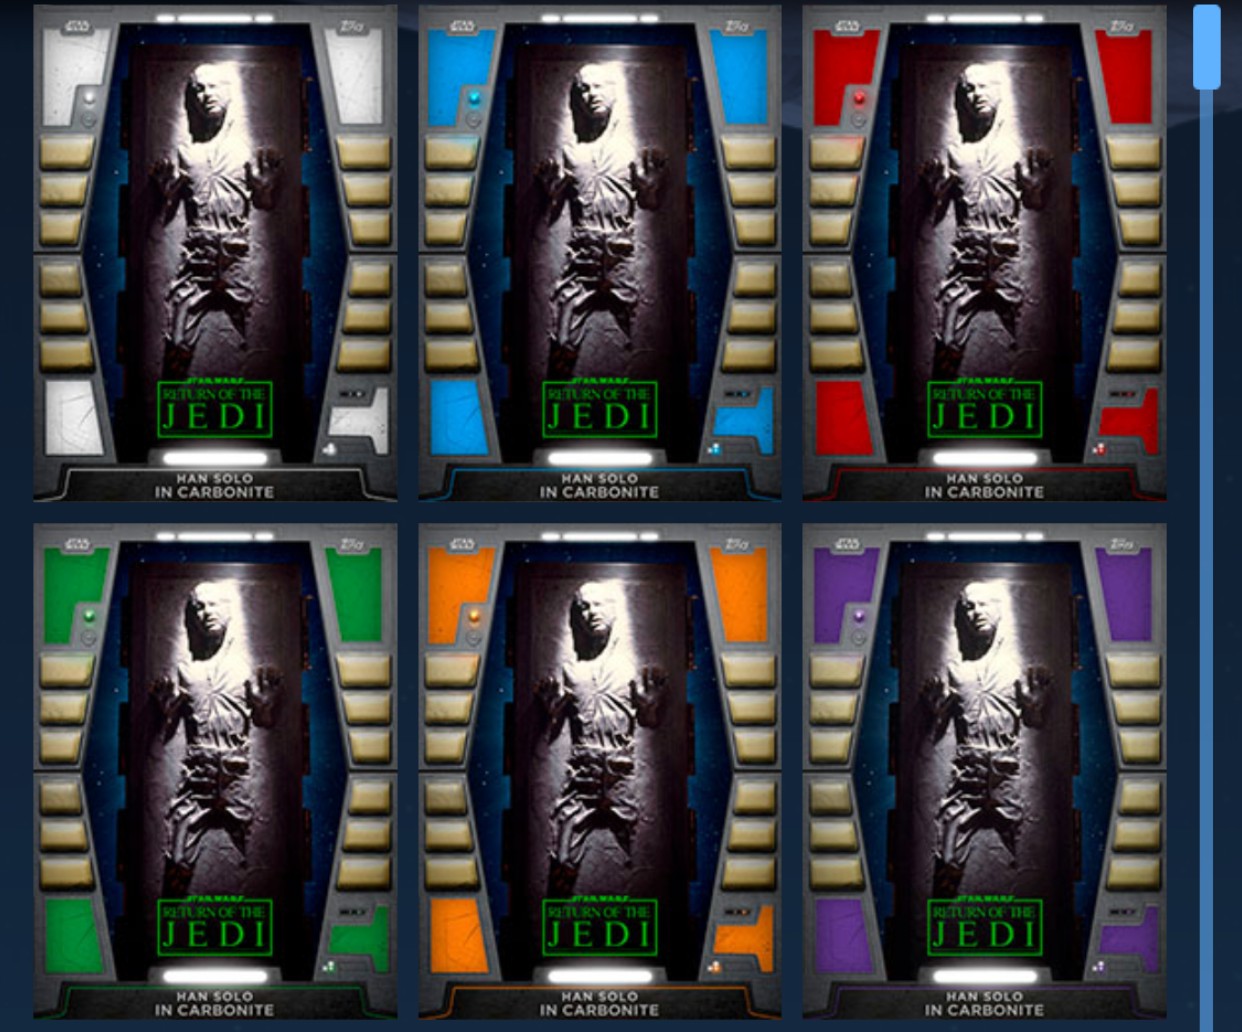 Here they are. The 2020 Han Solo in Carbonite base cards. I need a lot of these.  (Image: Topps)